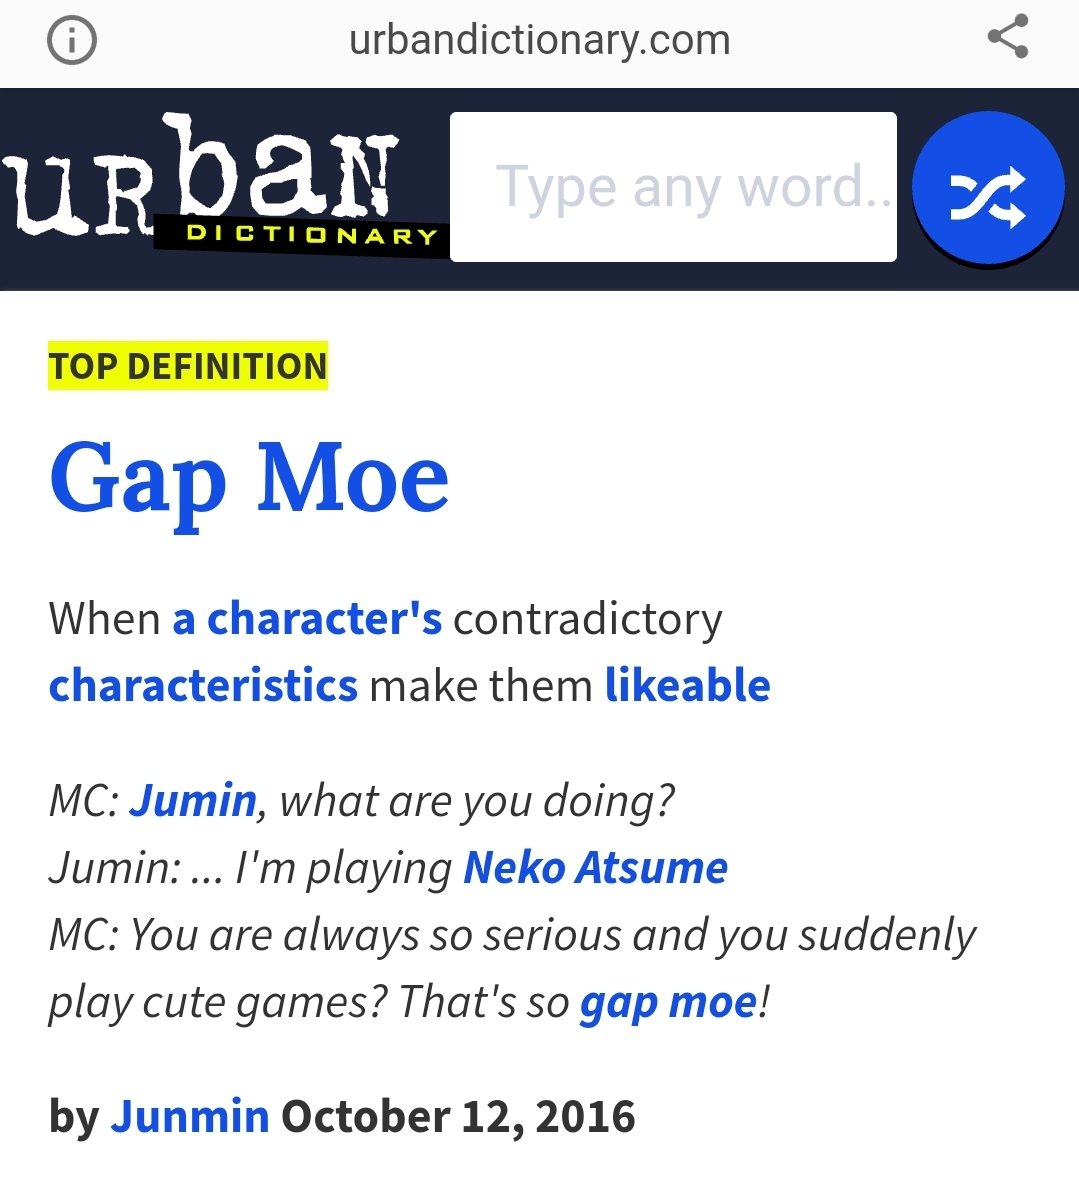 LMAO the definition on urban dictionary for Gap Moe CITES JUMIN. #mysticmes...